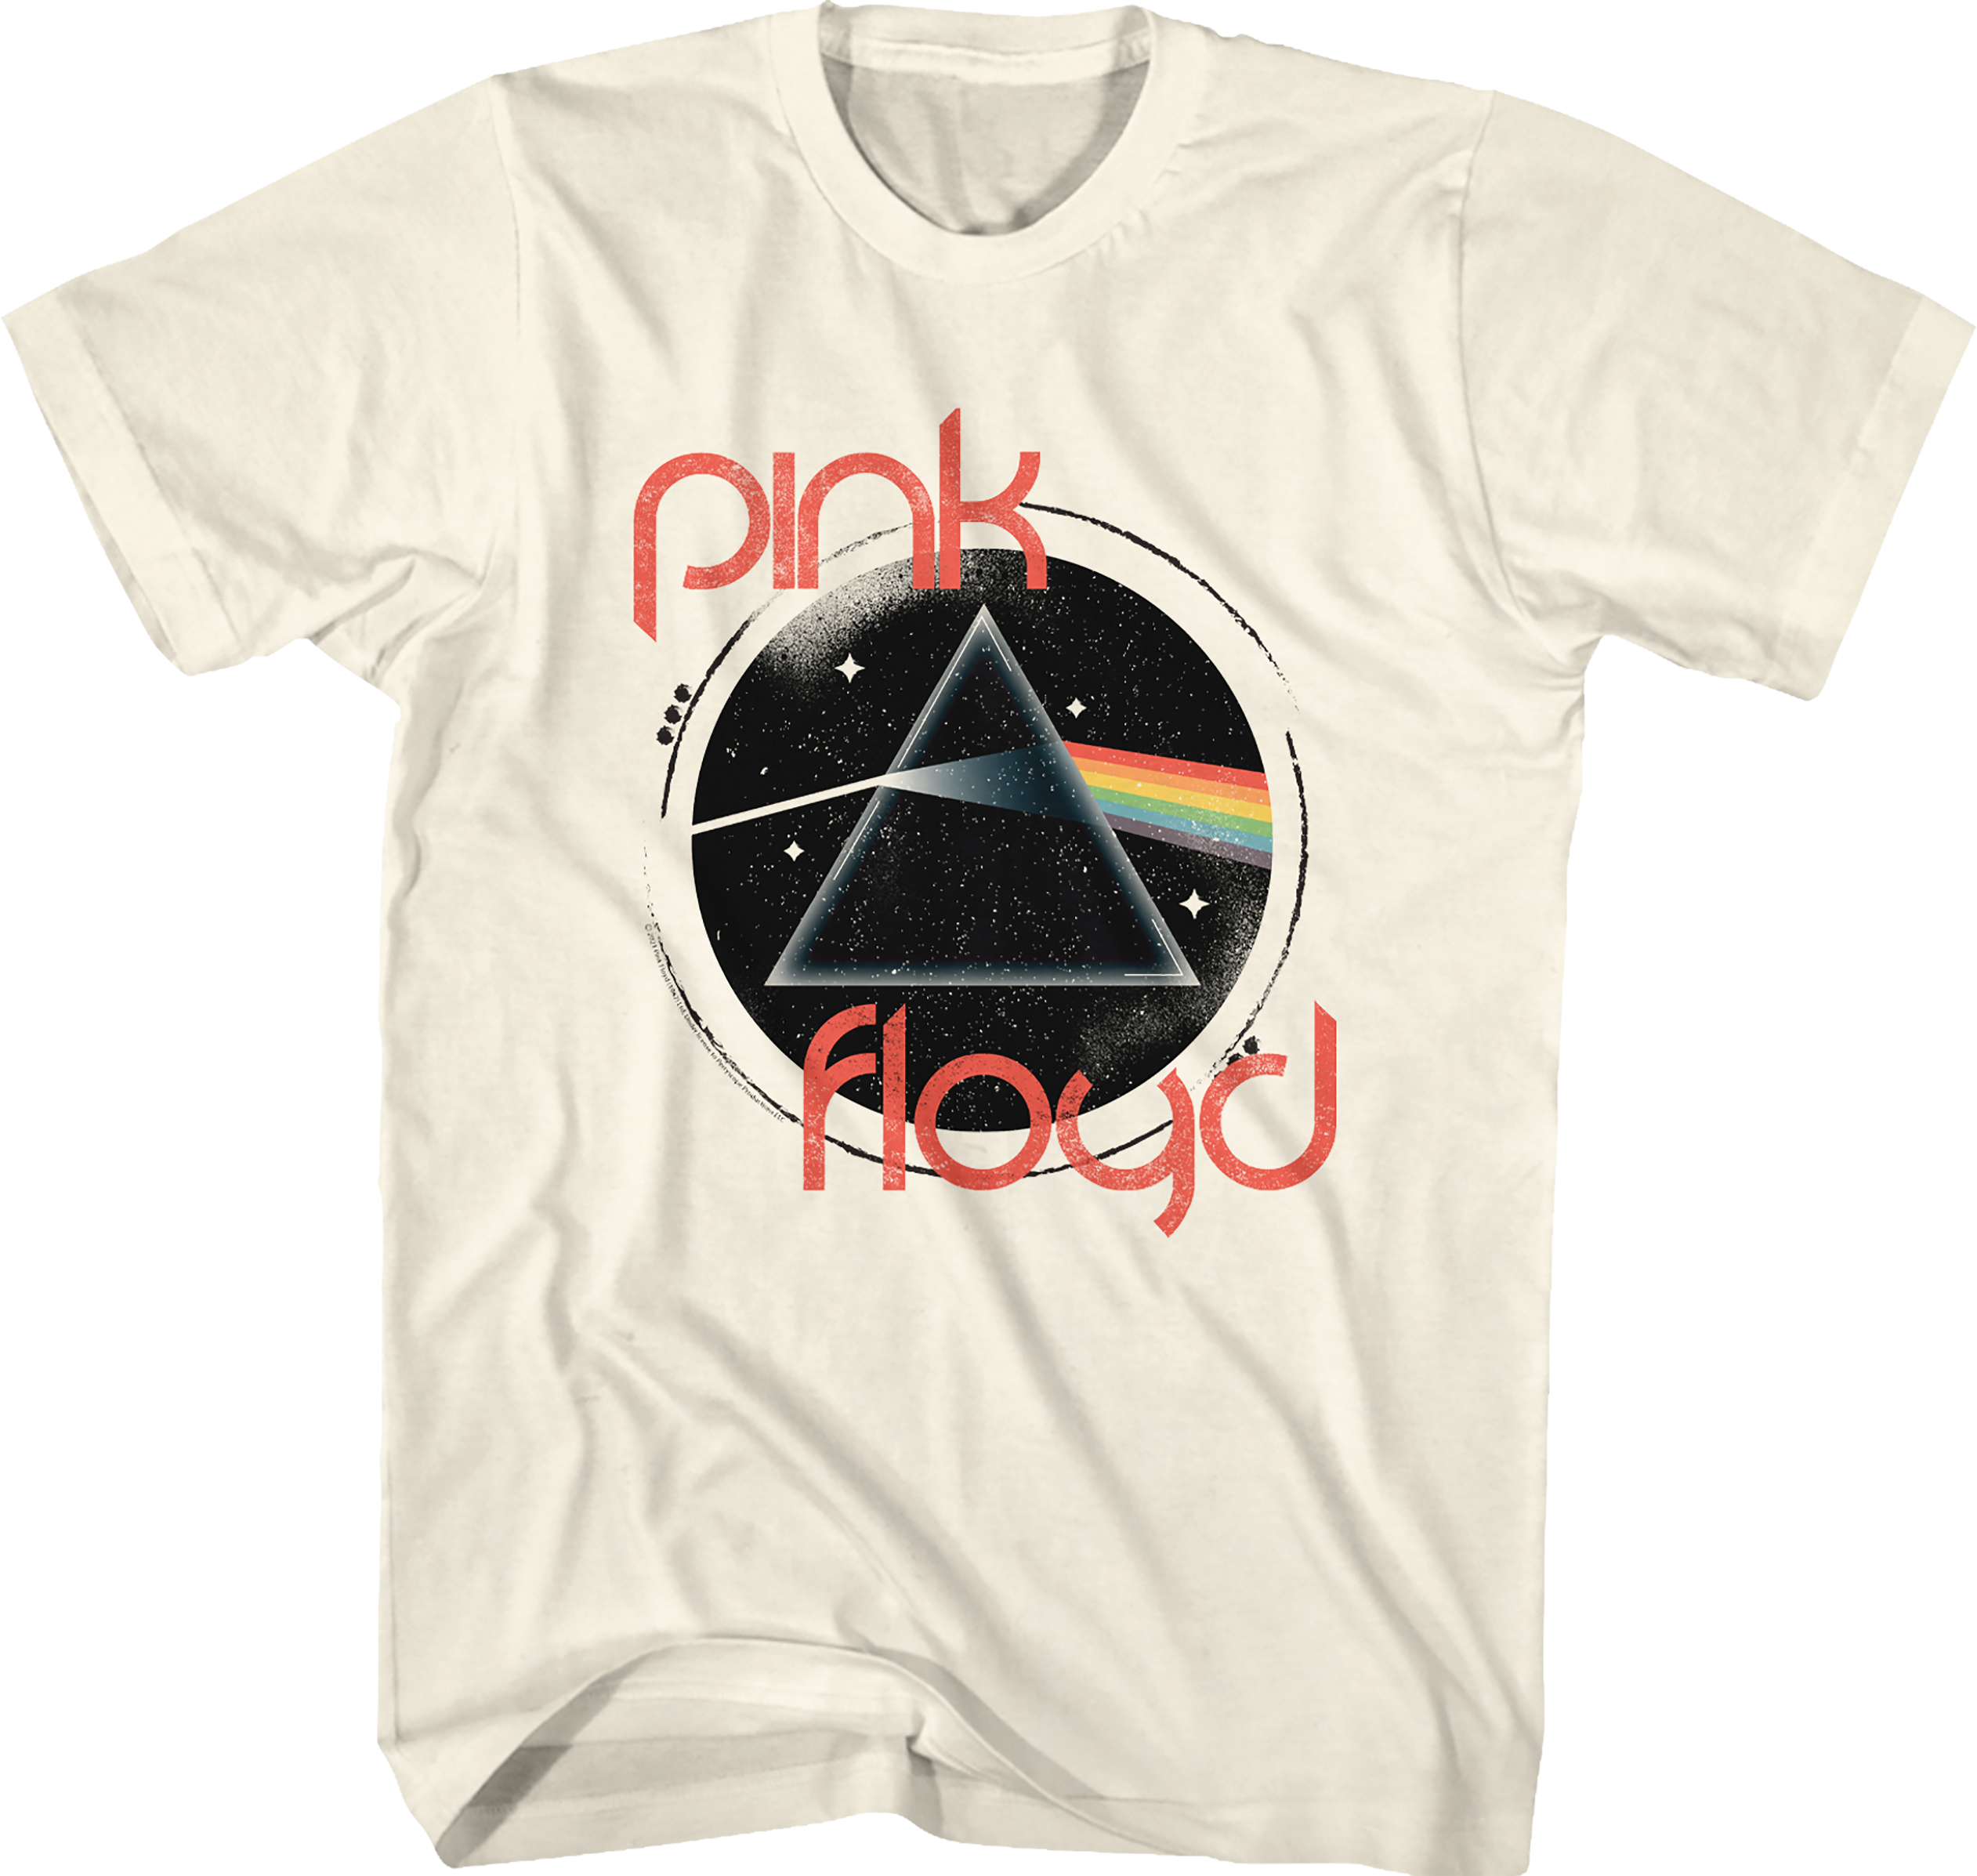 Side Circle Distressed Floyd Pink of T-Shirt Dark Moon the